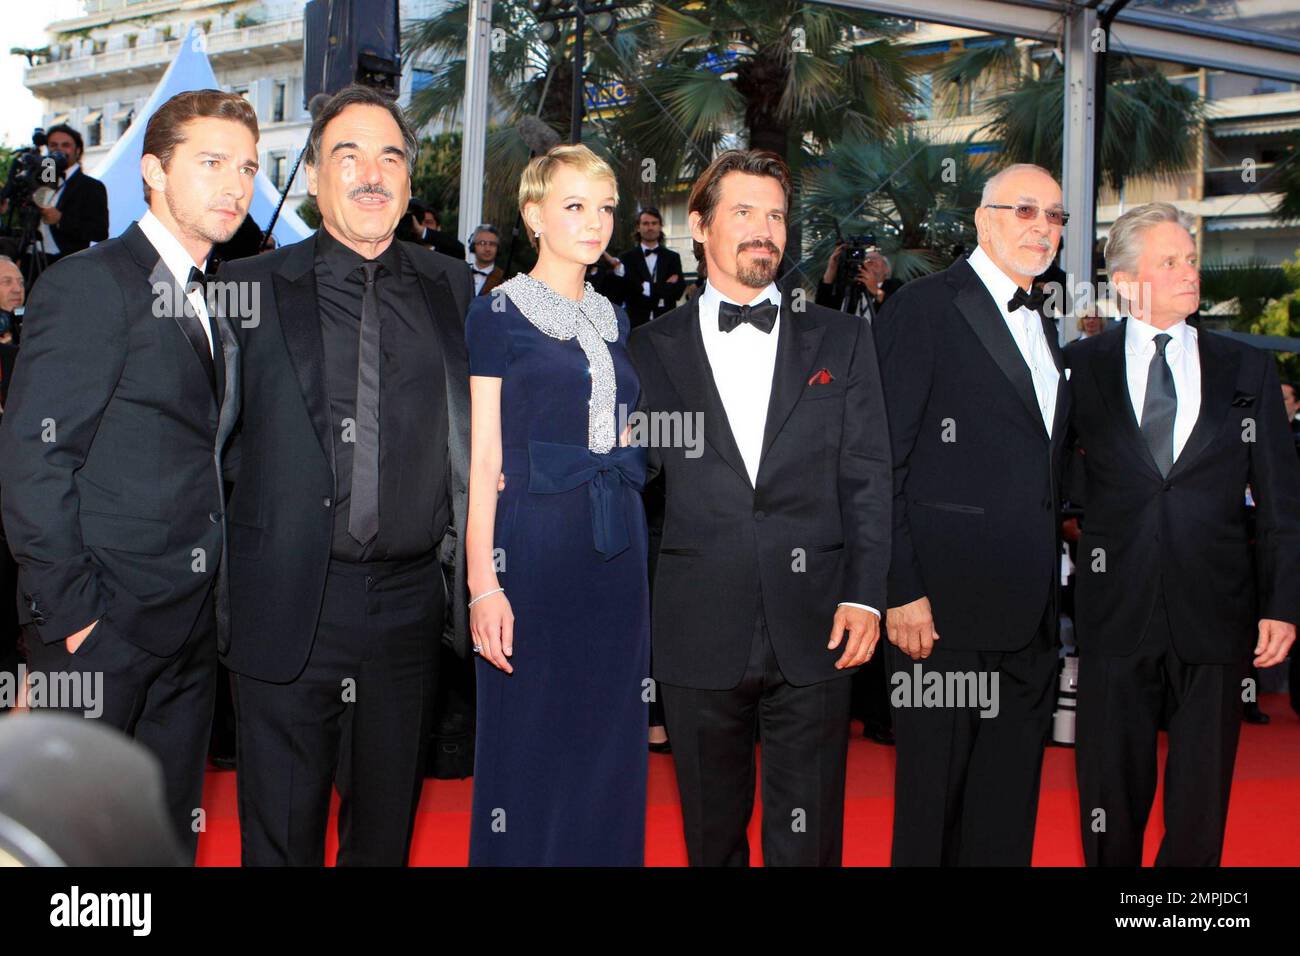 (L-R) Shia LaBeouf, Oliver Stone, Carey Mulligan, Josh Brolin, Frank Langella and Michael Douglas at the 63rd annual Cannes Film Festival premiere of 'Wall Street: Money Never Sleeps' in Cannes, France. 5/14/10.   . Stock Photo